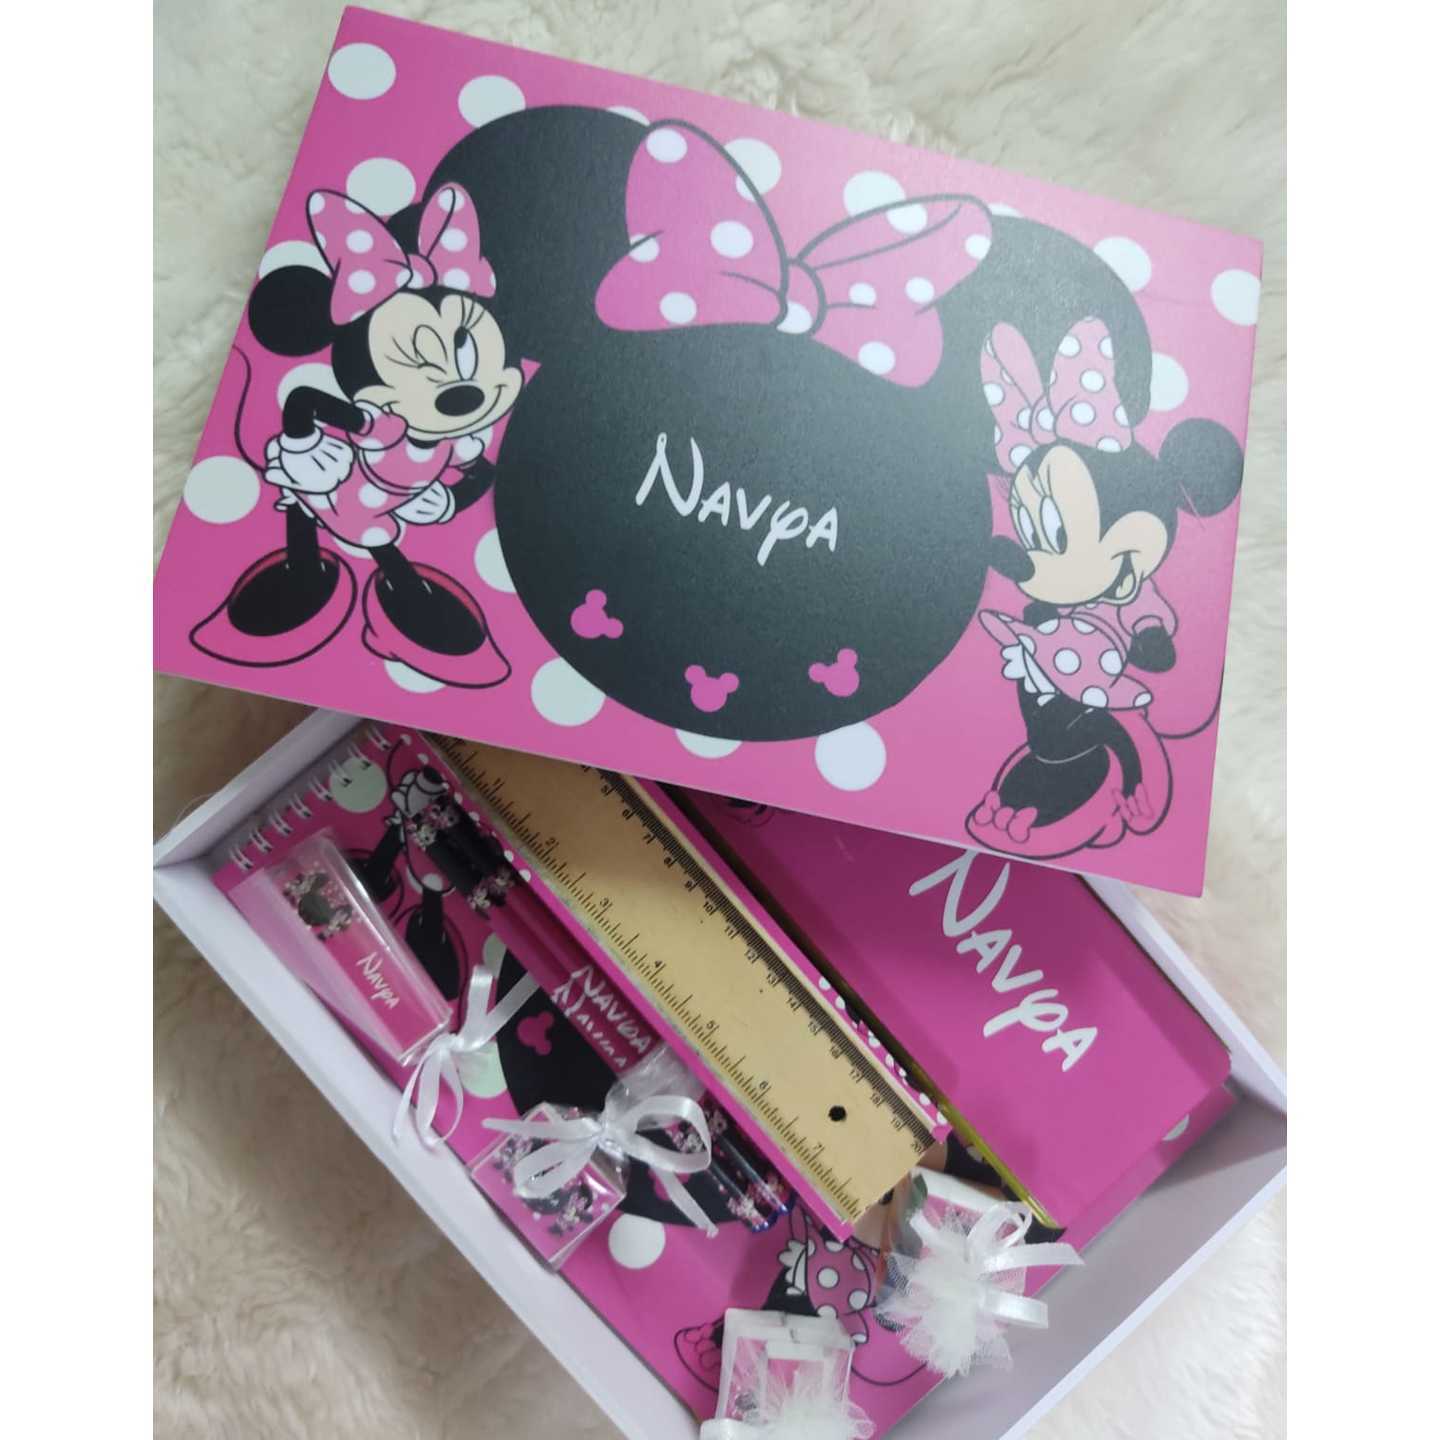 Personalised Stationary Set - Minnie Mouse